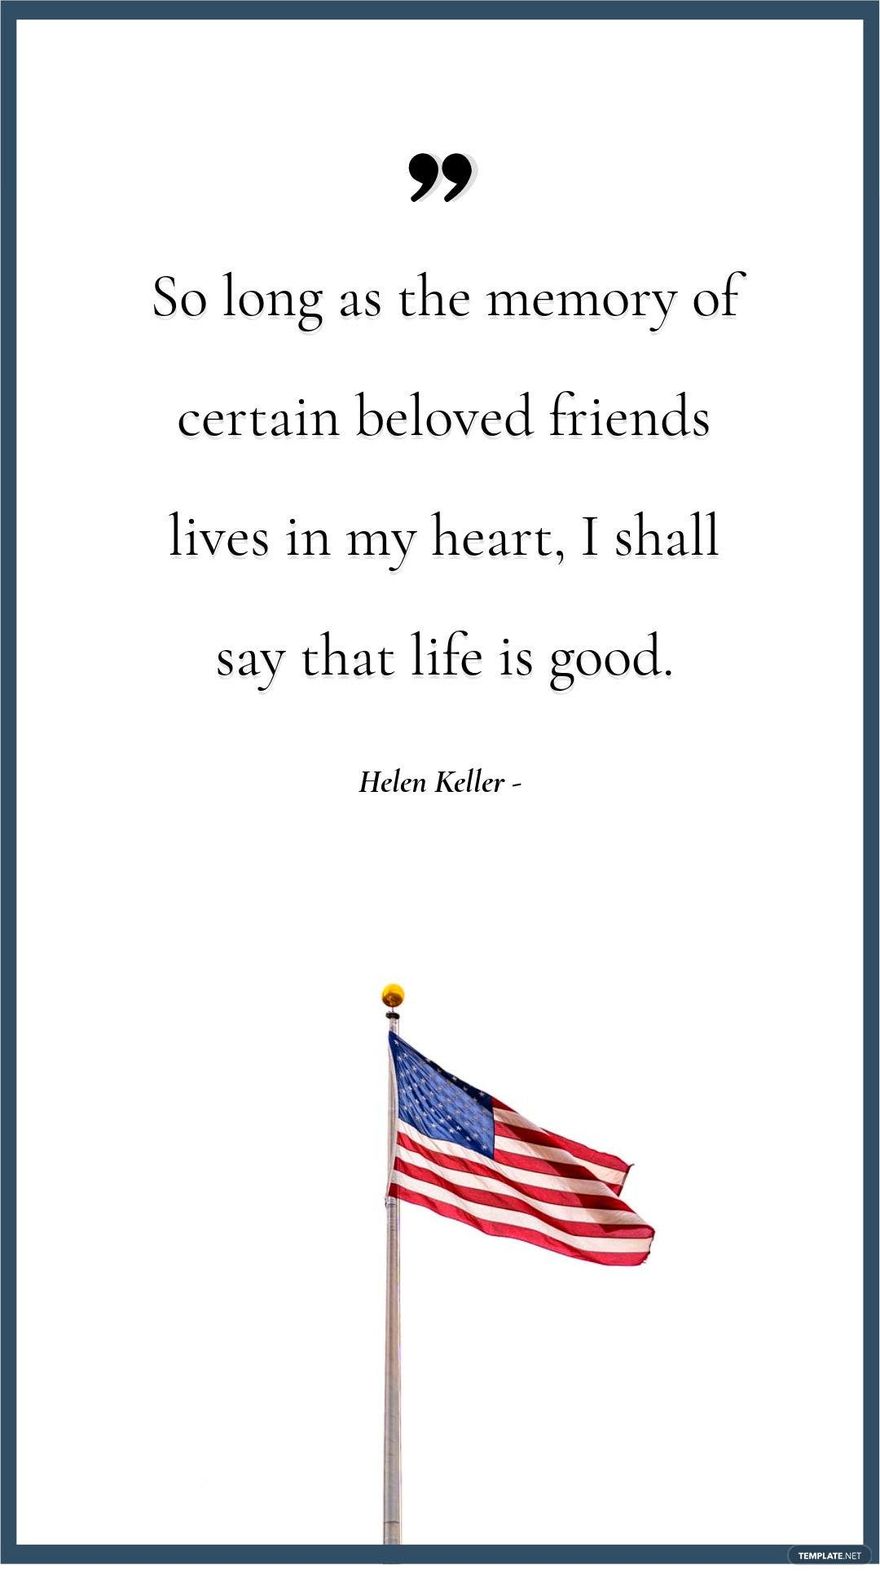 Helen Keller - So long as the memory of certain beloved friends lives in my heart, I shall say that life is good.